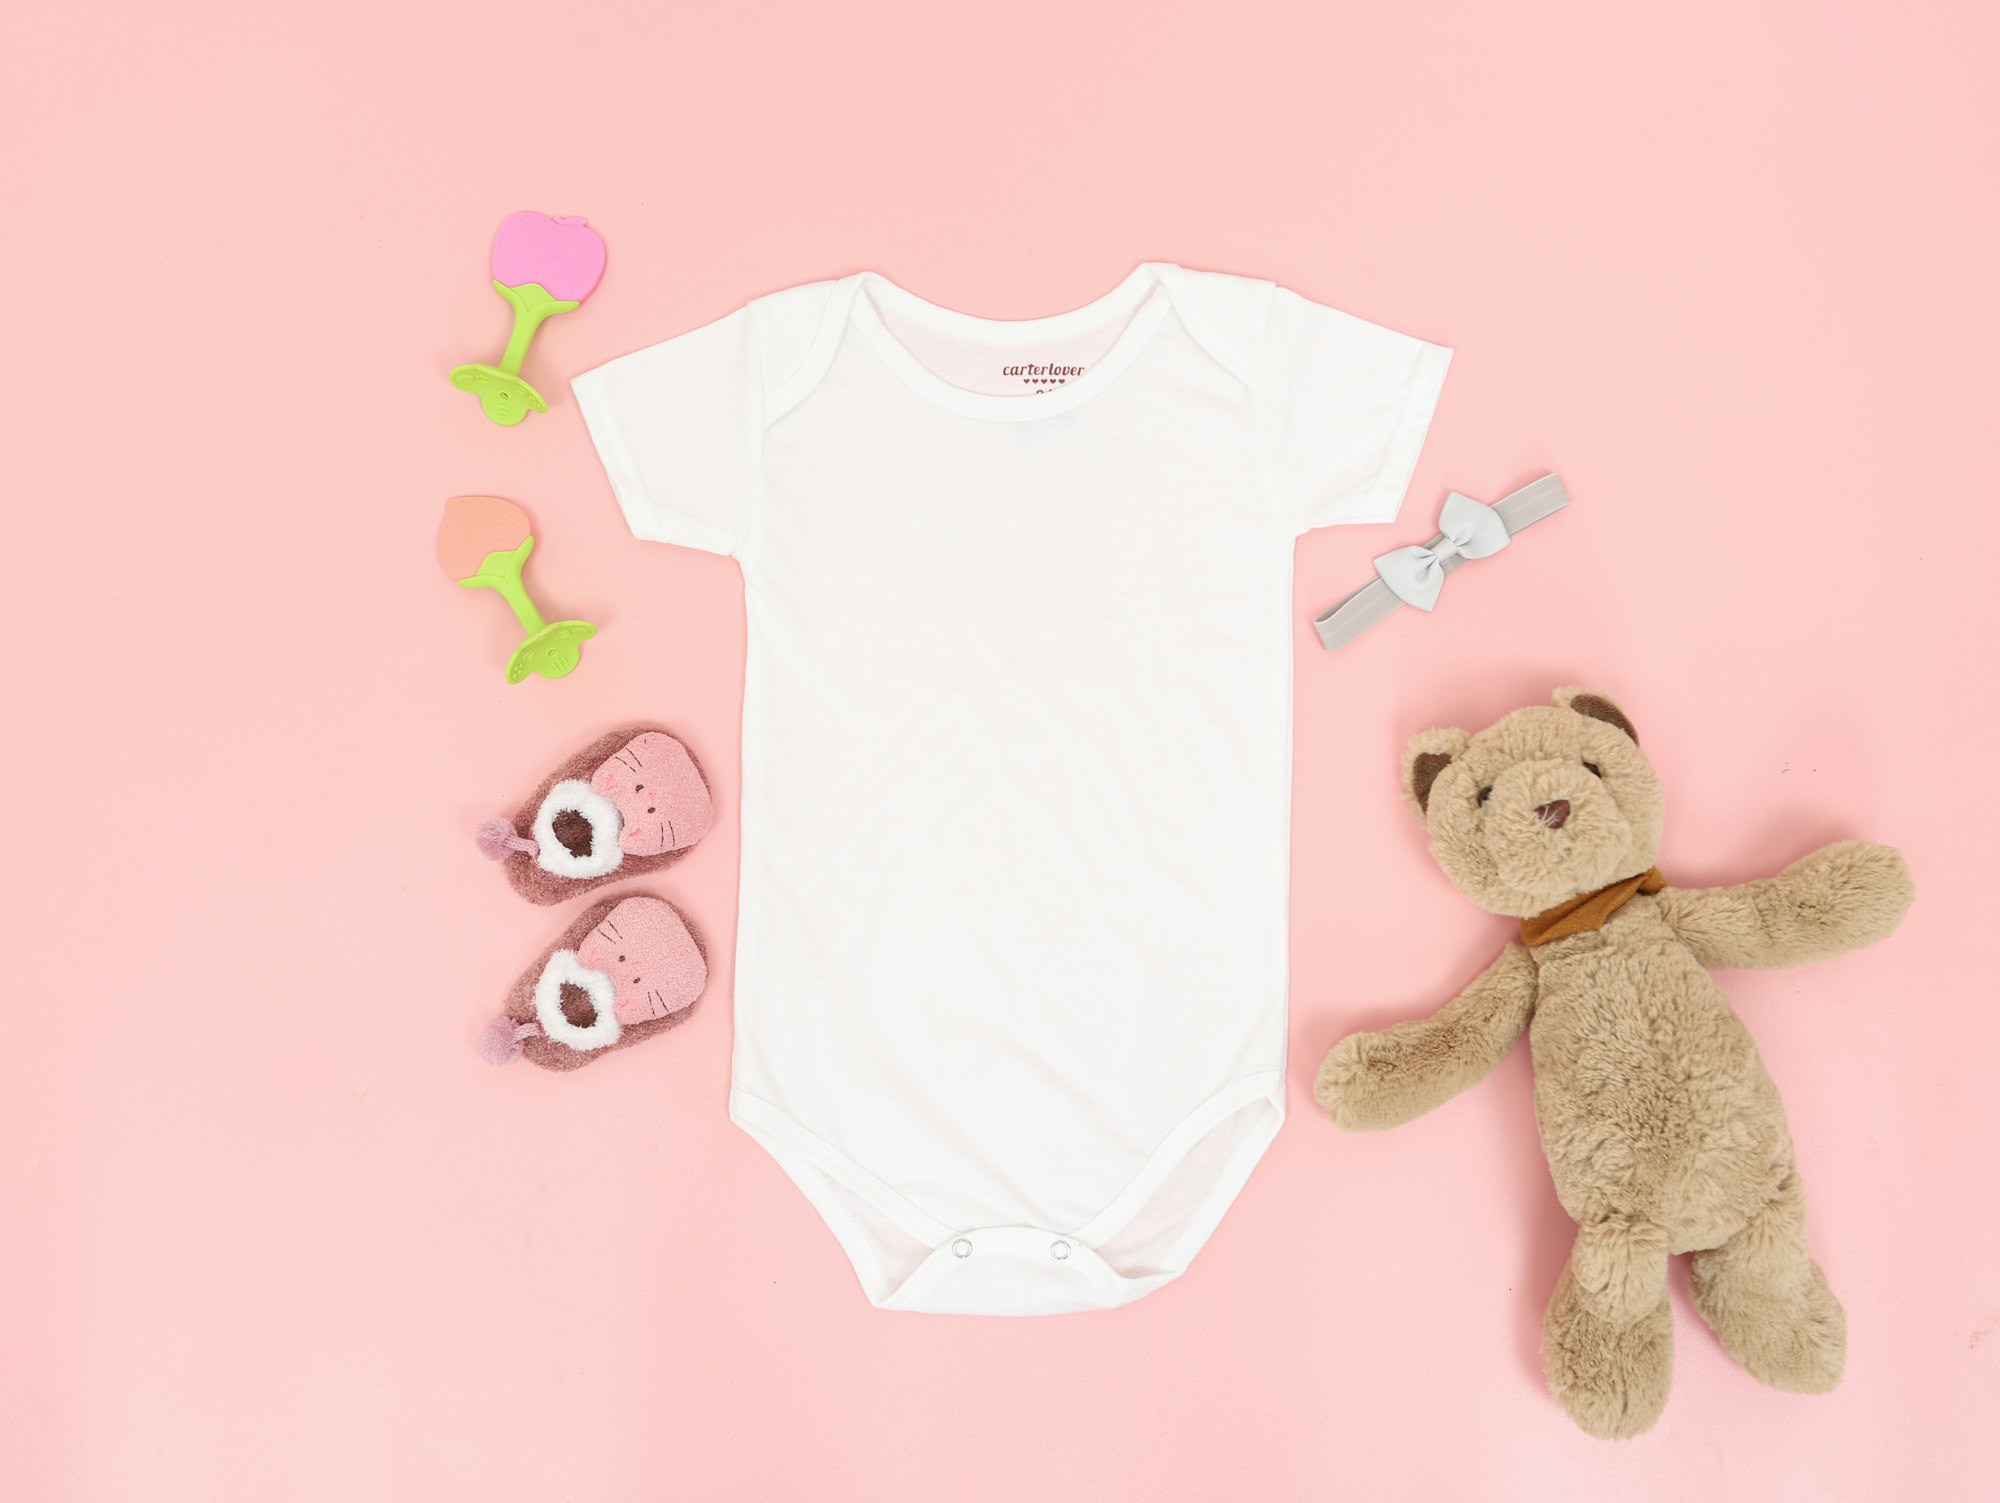 A onesie lying on a pink surface next to baby toys and a cute teddy bear.